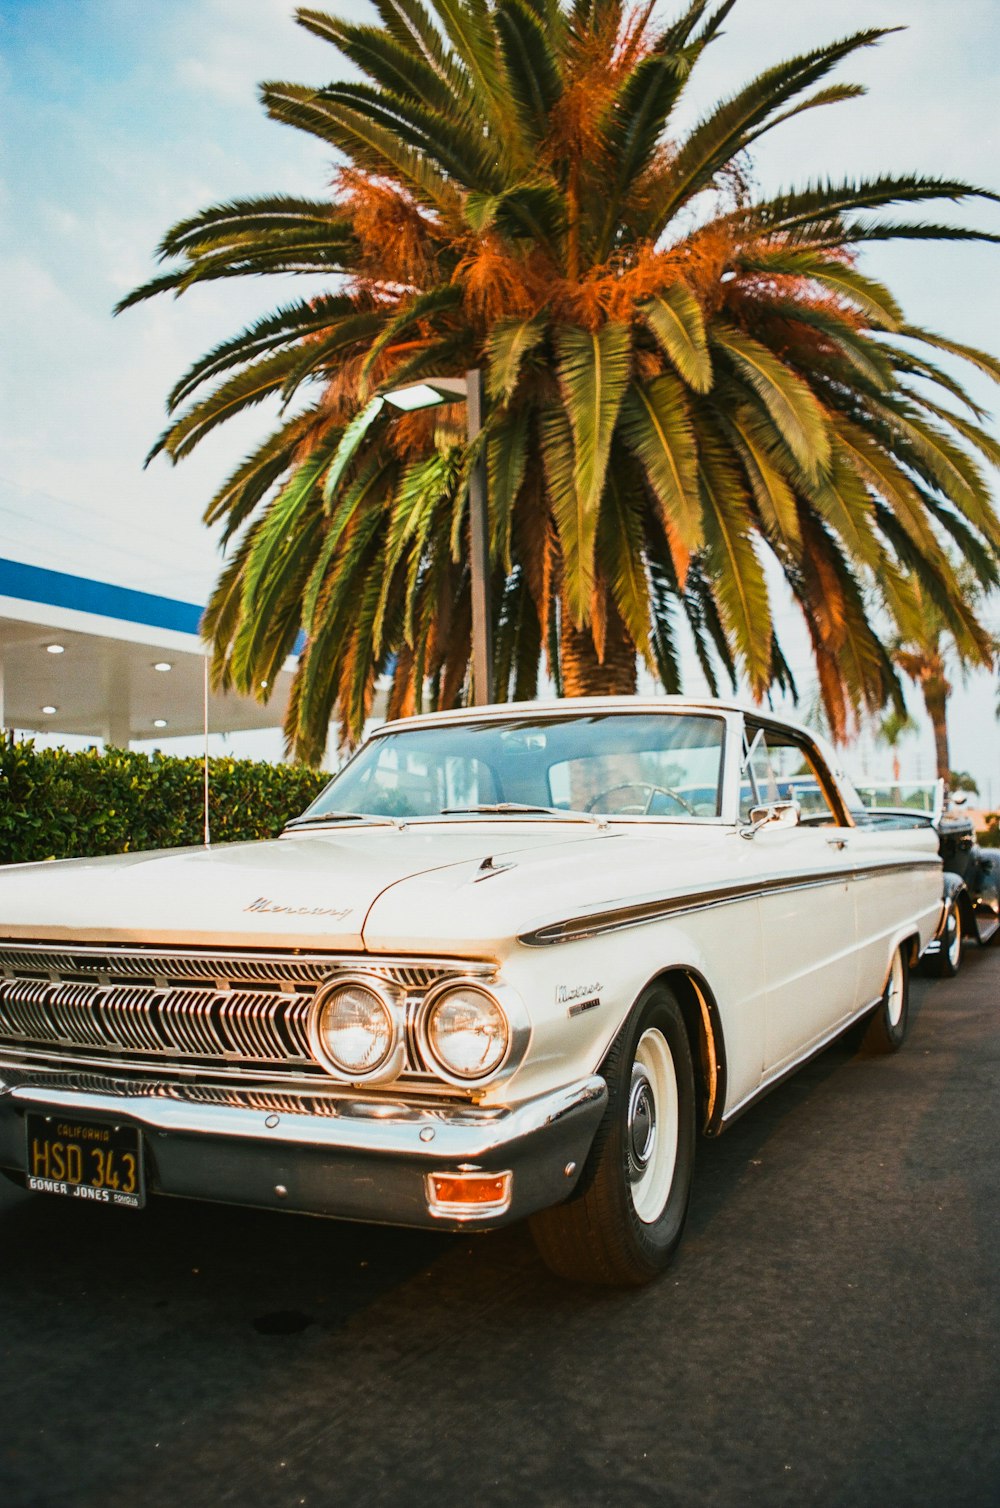 white and blue classic car parked near palm trees during daytime